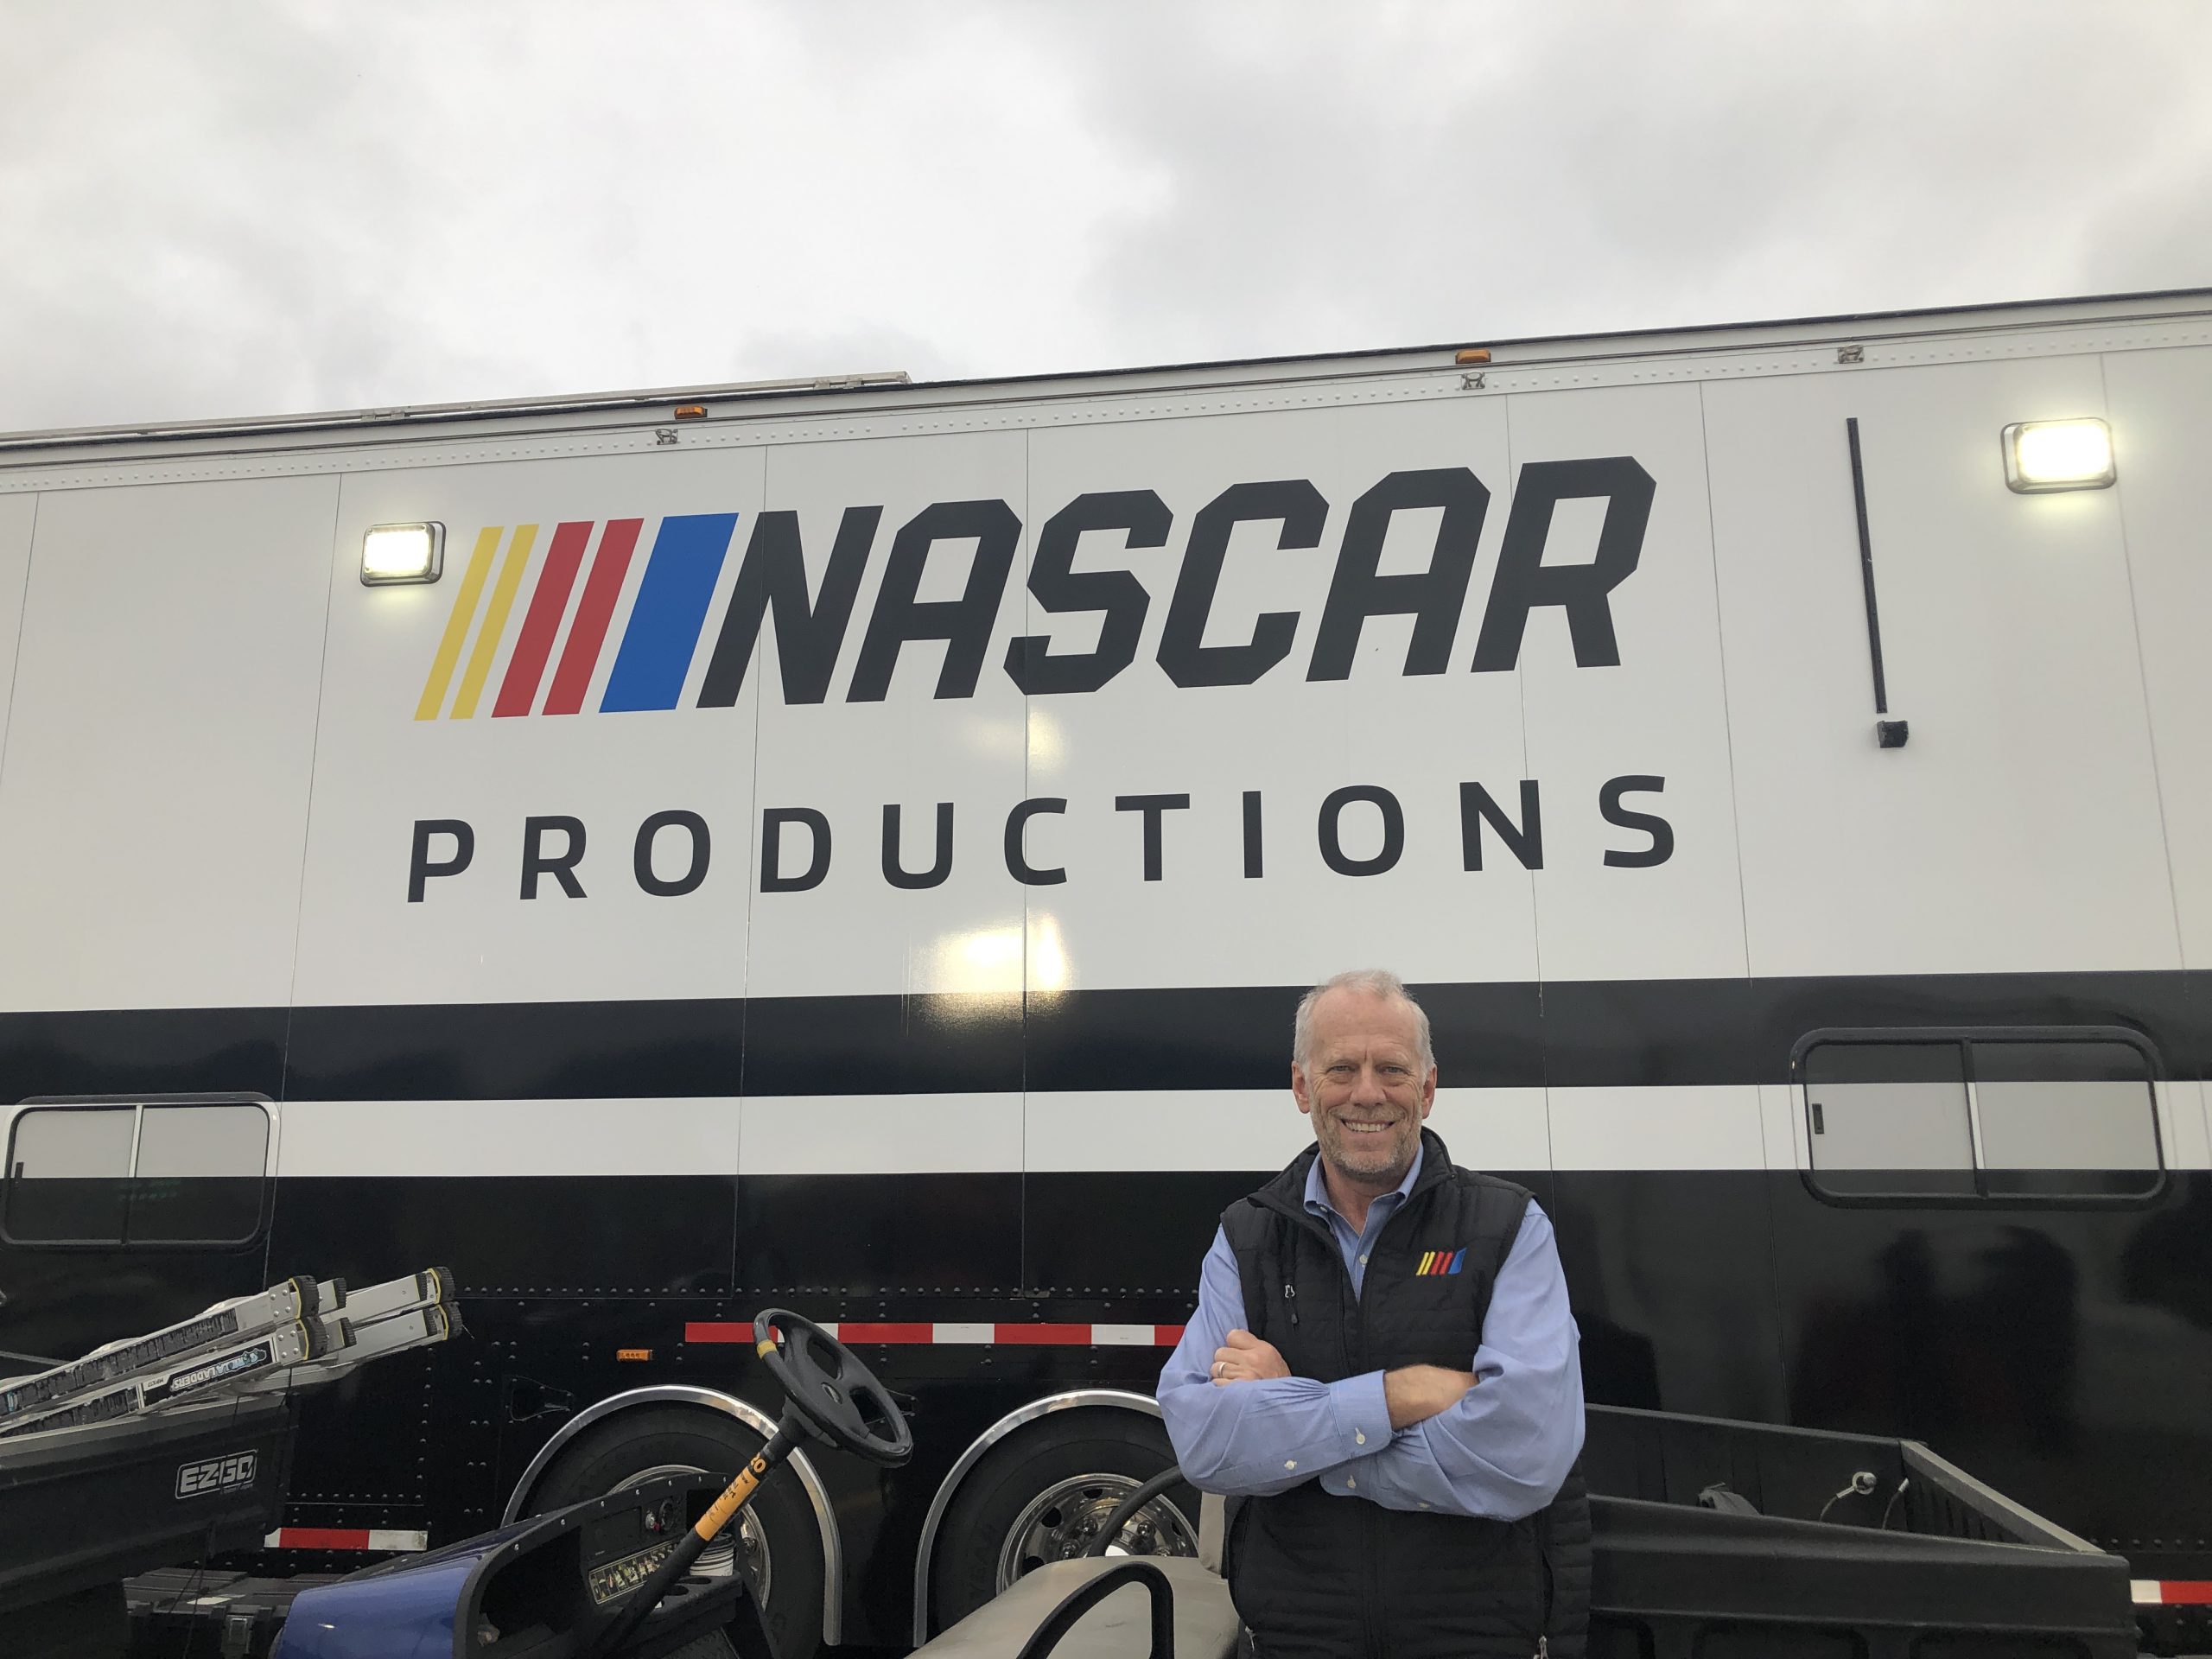 Live From Daytona 500 NASCAR Productions Embraces At-Home Workflow for Super Bowl of Racing